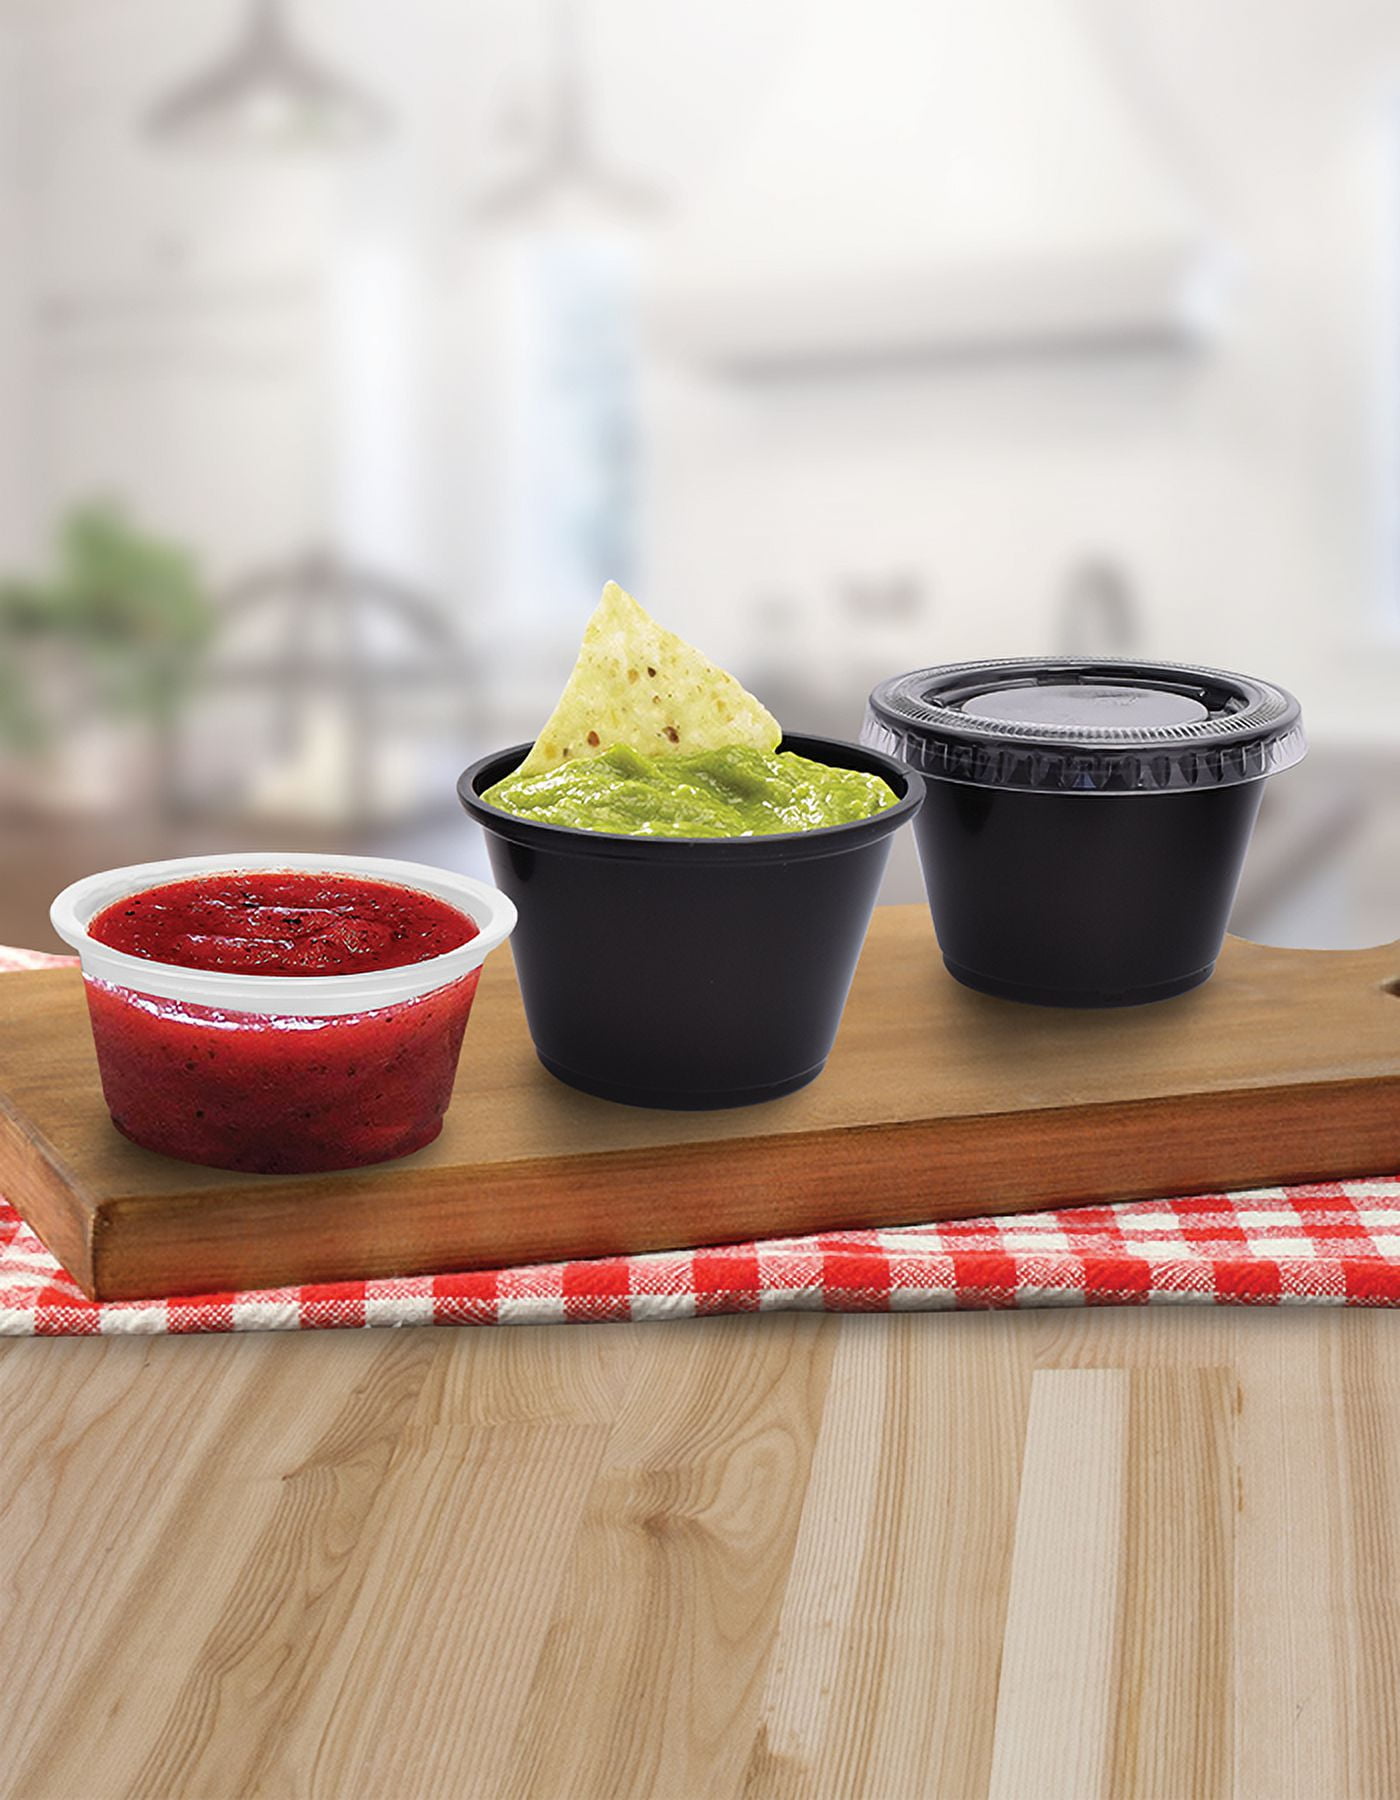 Nuogo 400 Sets 2oz Plastic Containers with Lids for Food Disposable Sauce  Cups Small Jelly Shot Jars Clear Portion Cups Condiment Container Salad